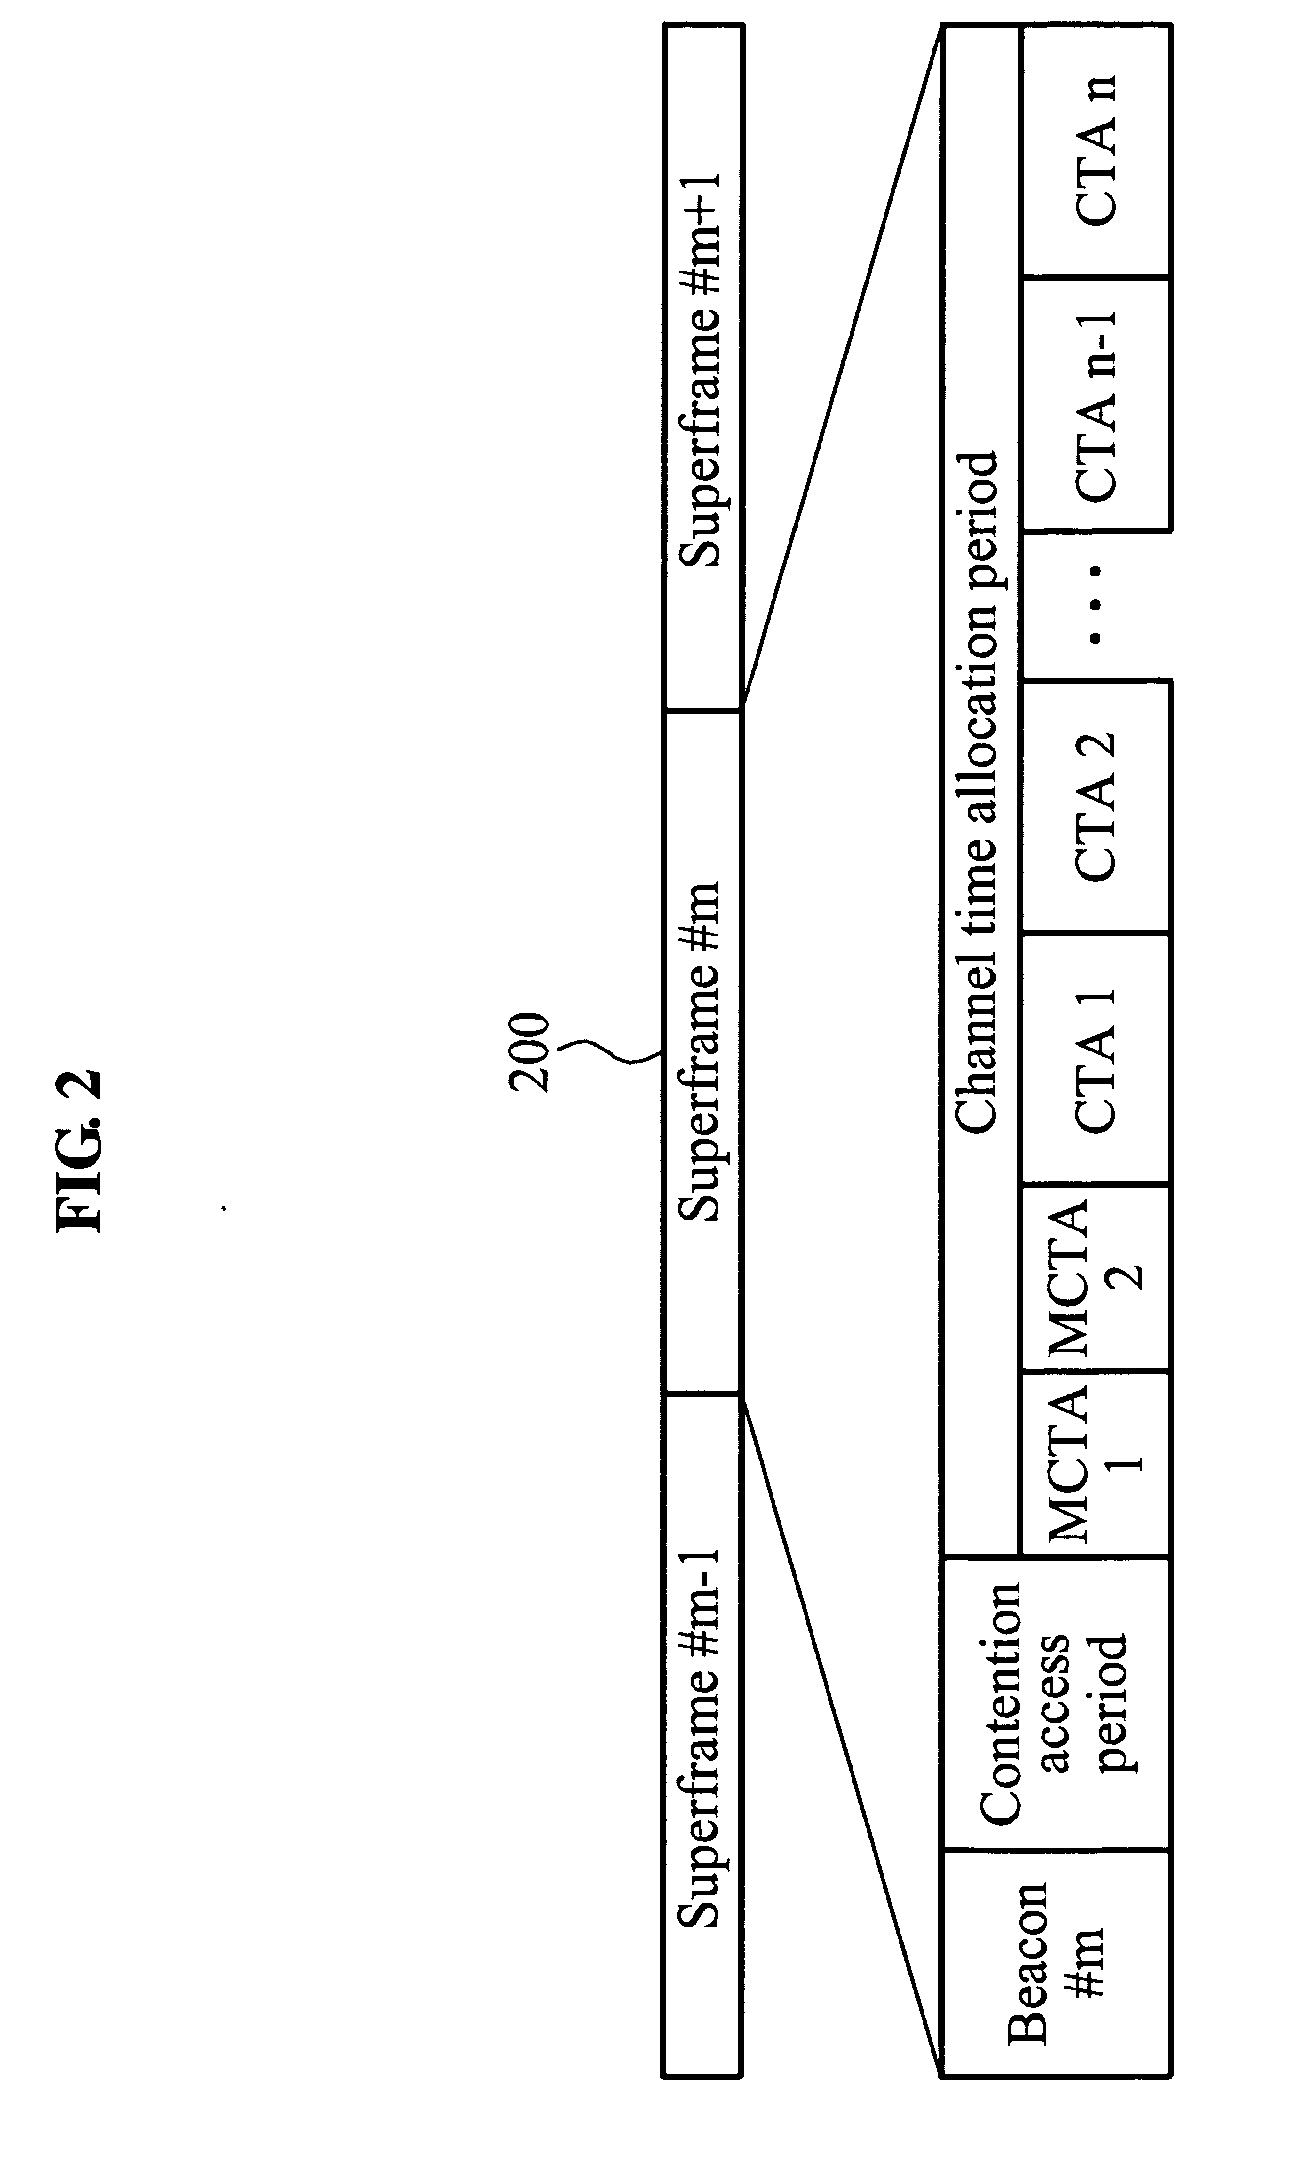 Method and apparatus for spatial reuse by assistance of distributed devices over wireless system using directional antennas